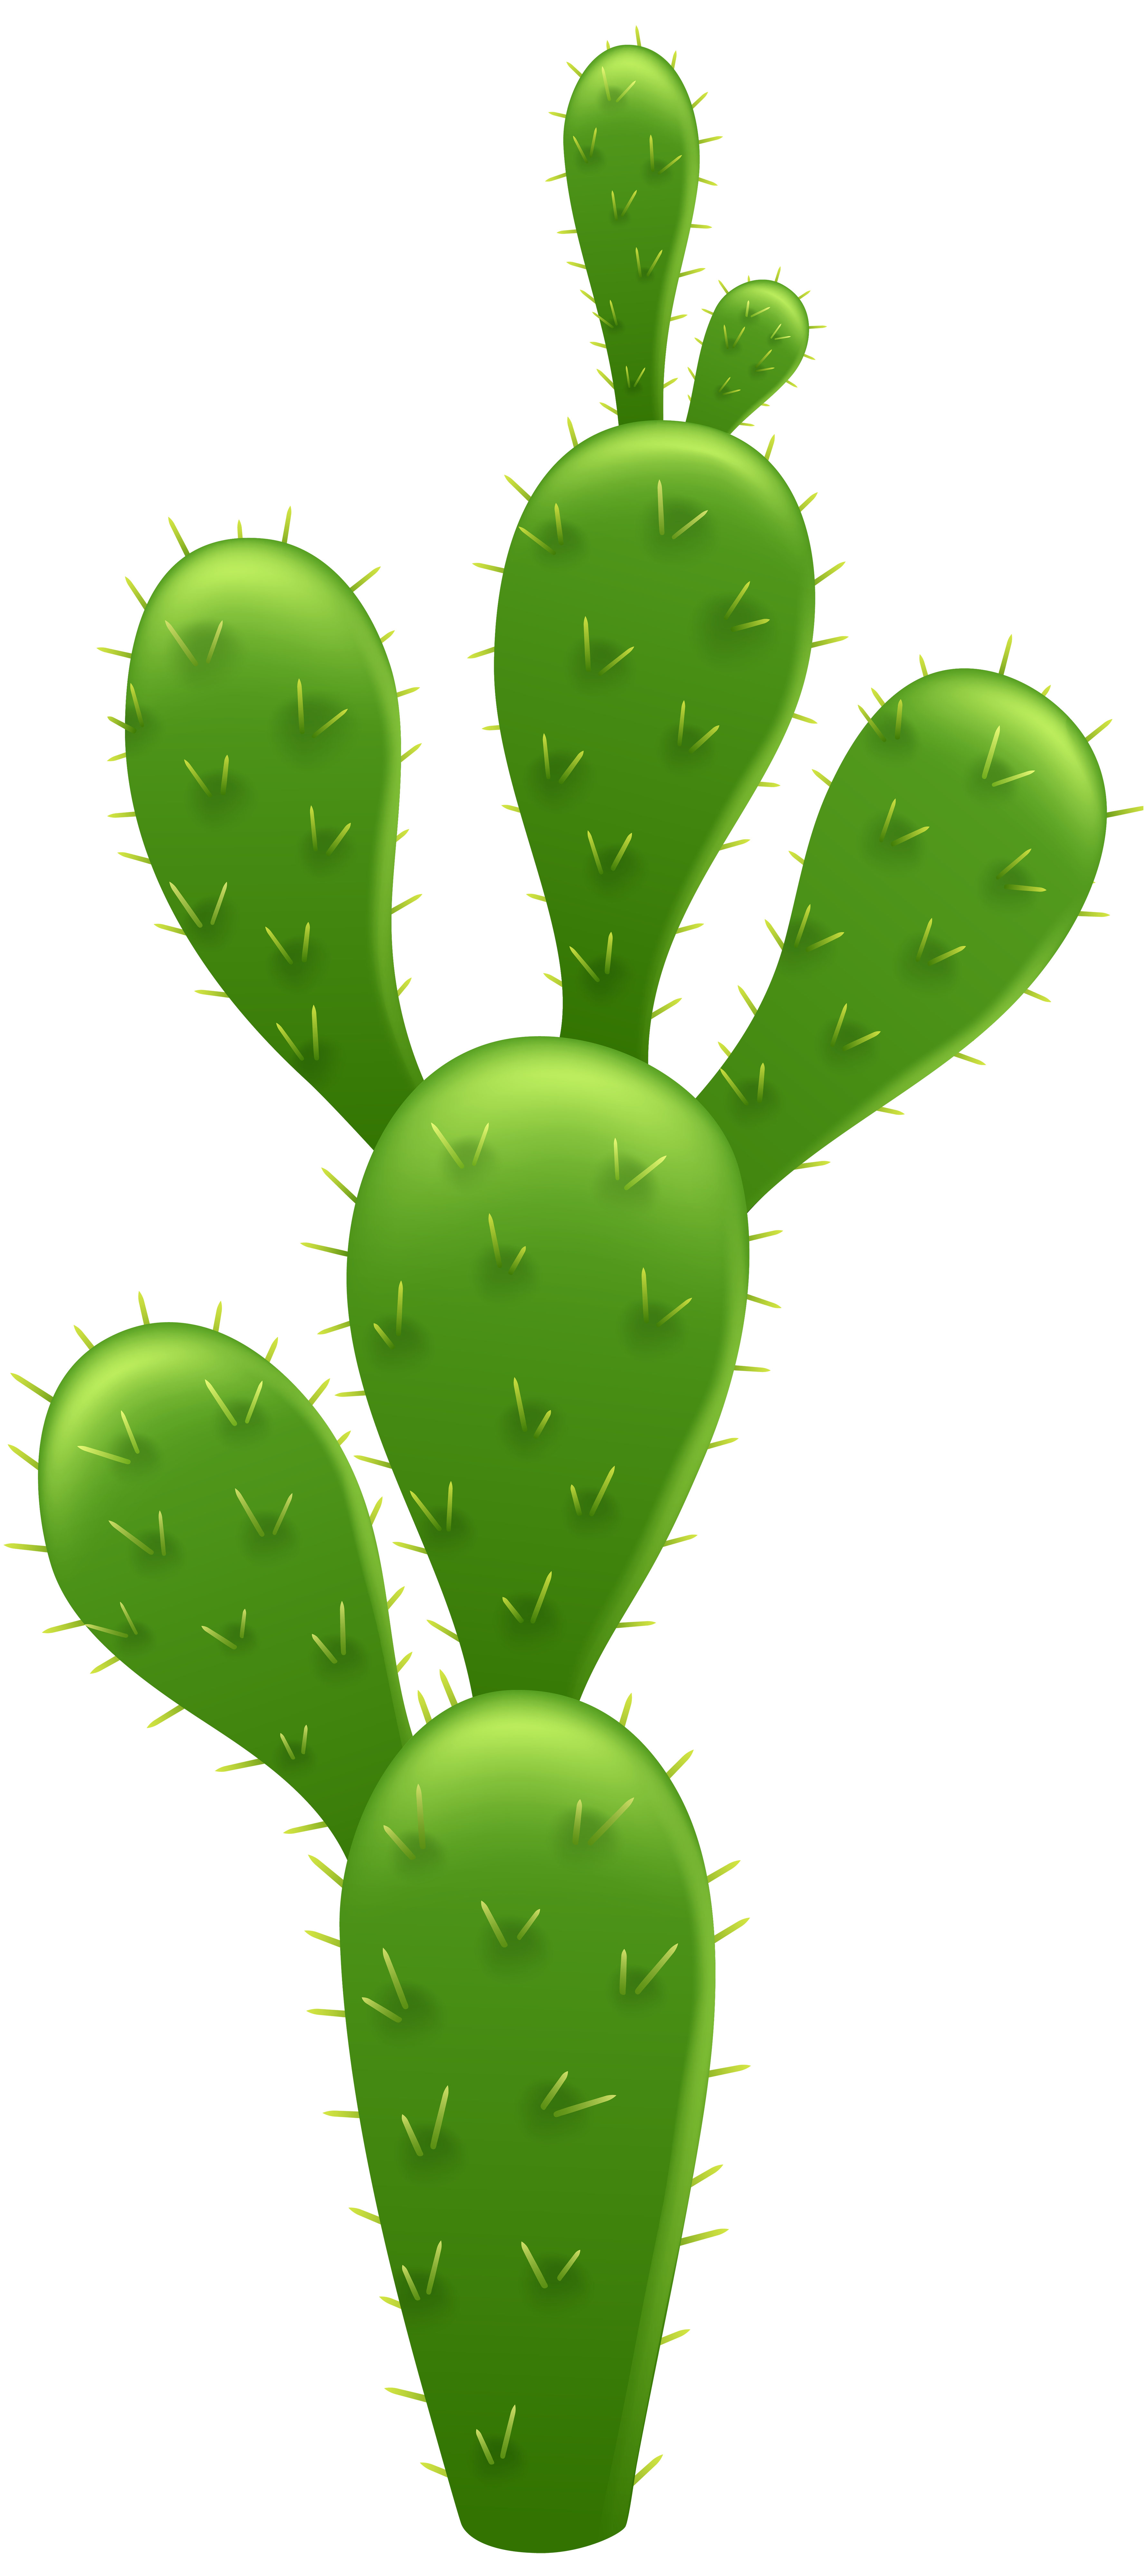 Cactus Prickle PNG High-Quality Image